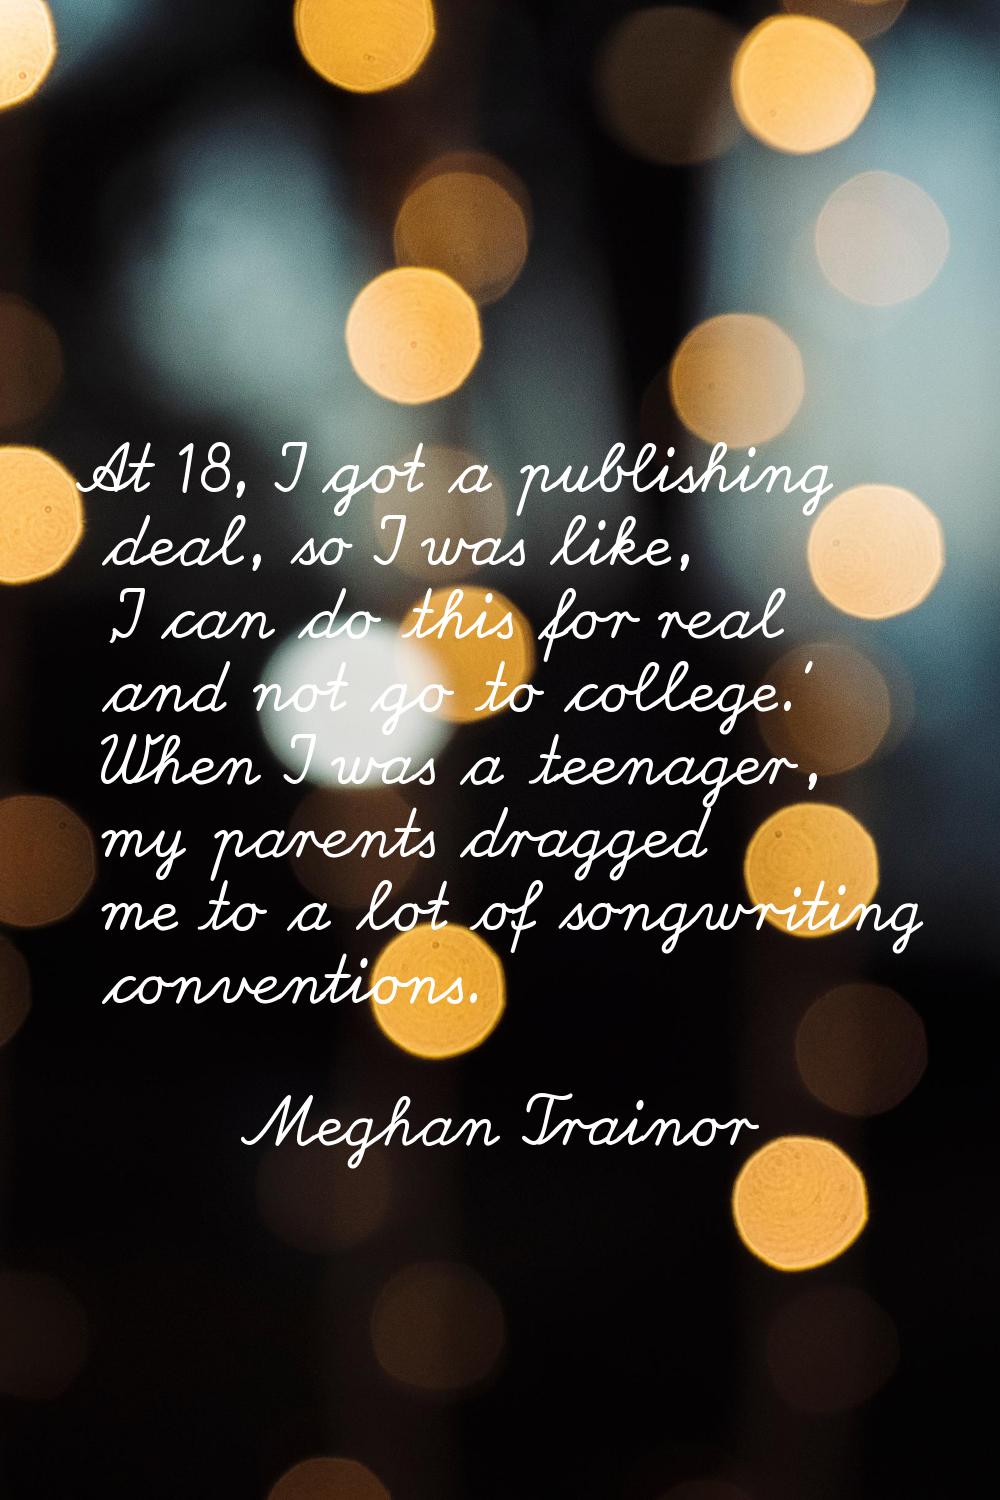 At 18, I got a publishing deal, so I was like, 'I can do this for real and not go to college.' When